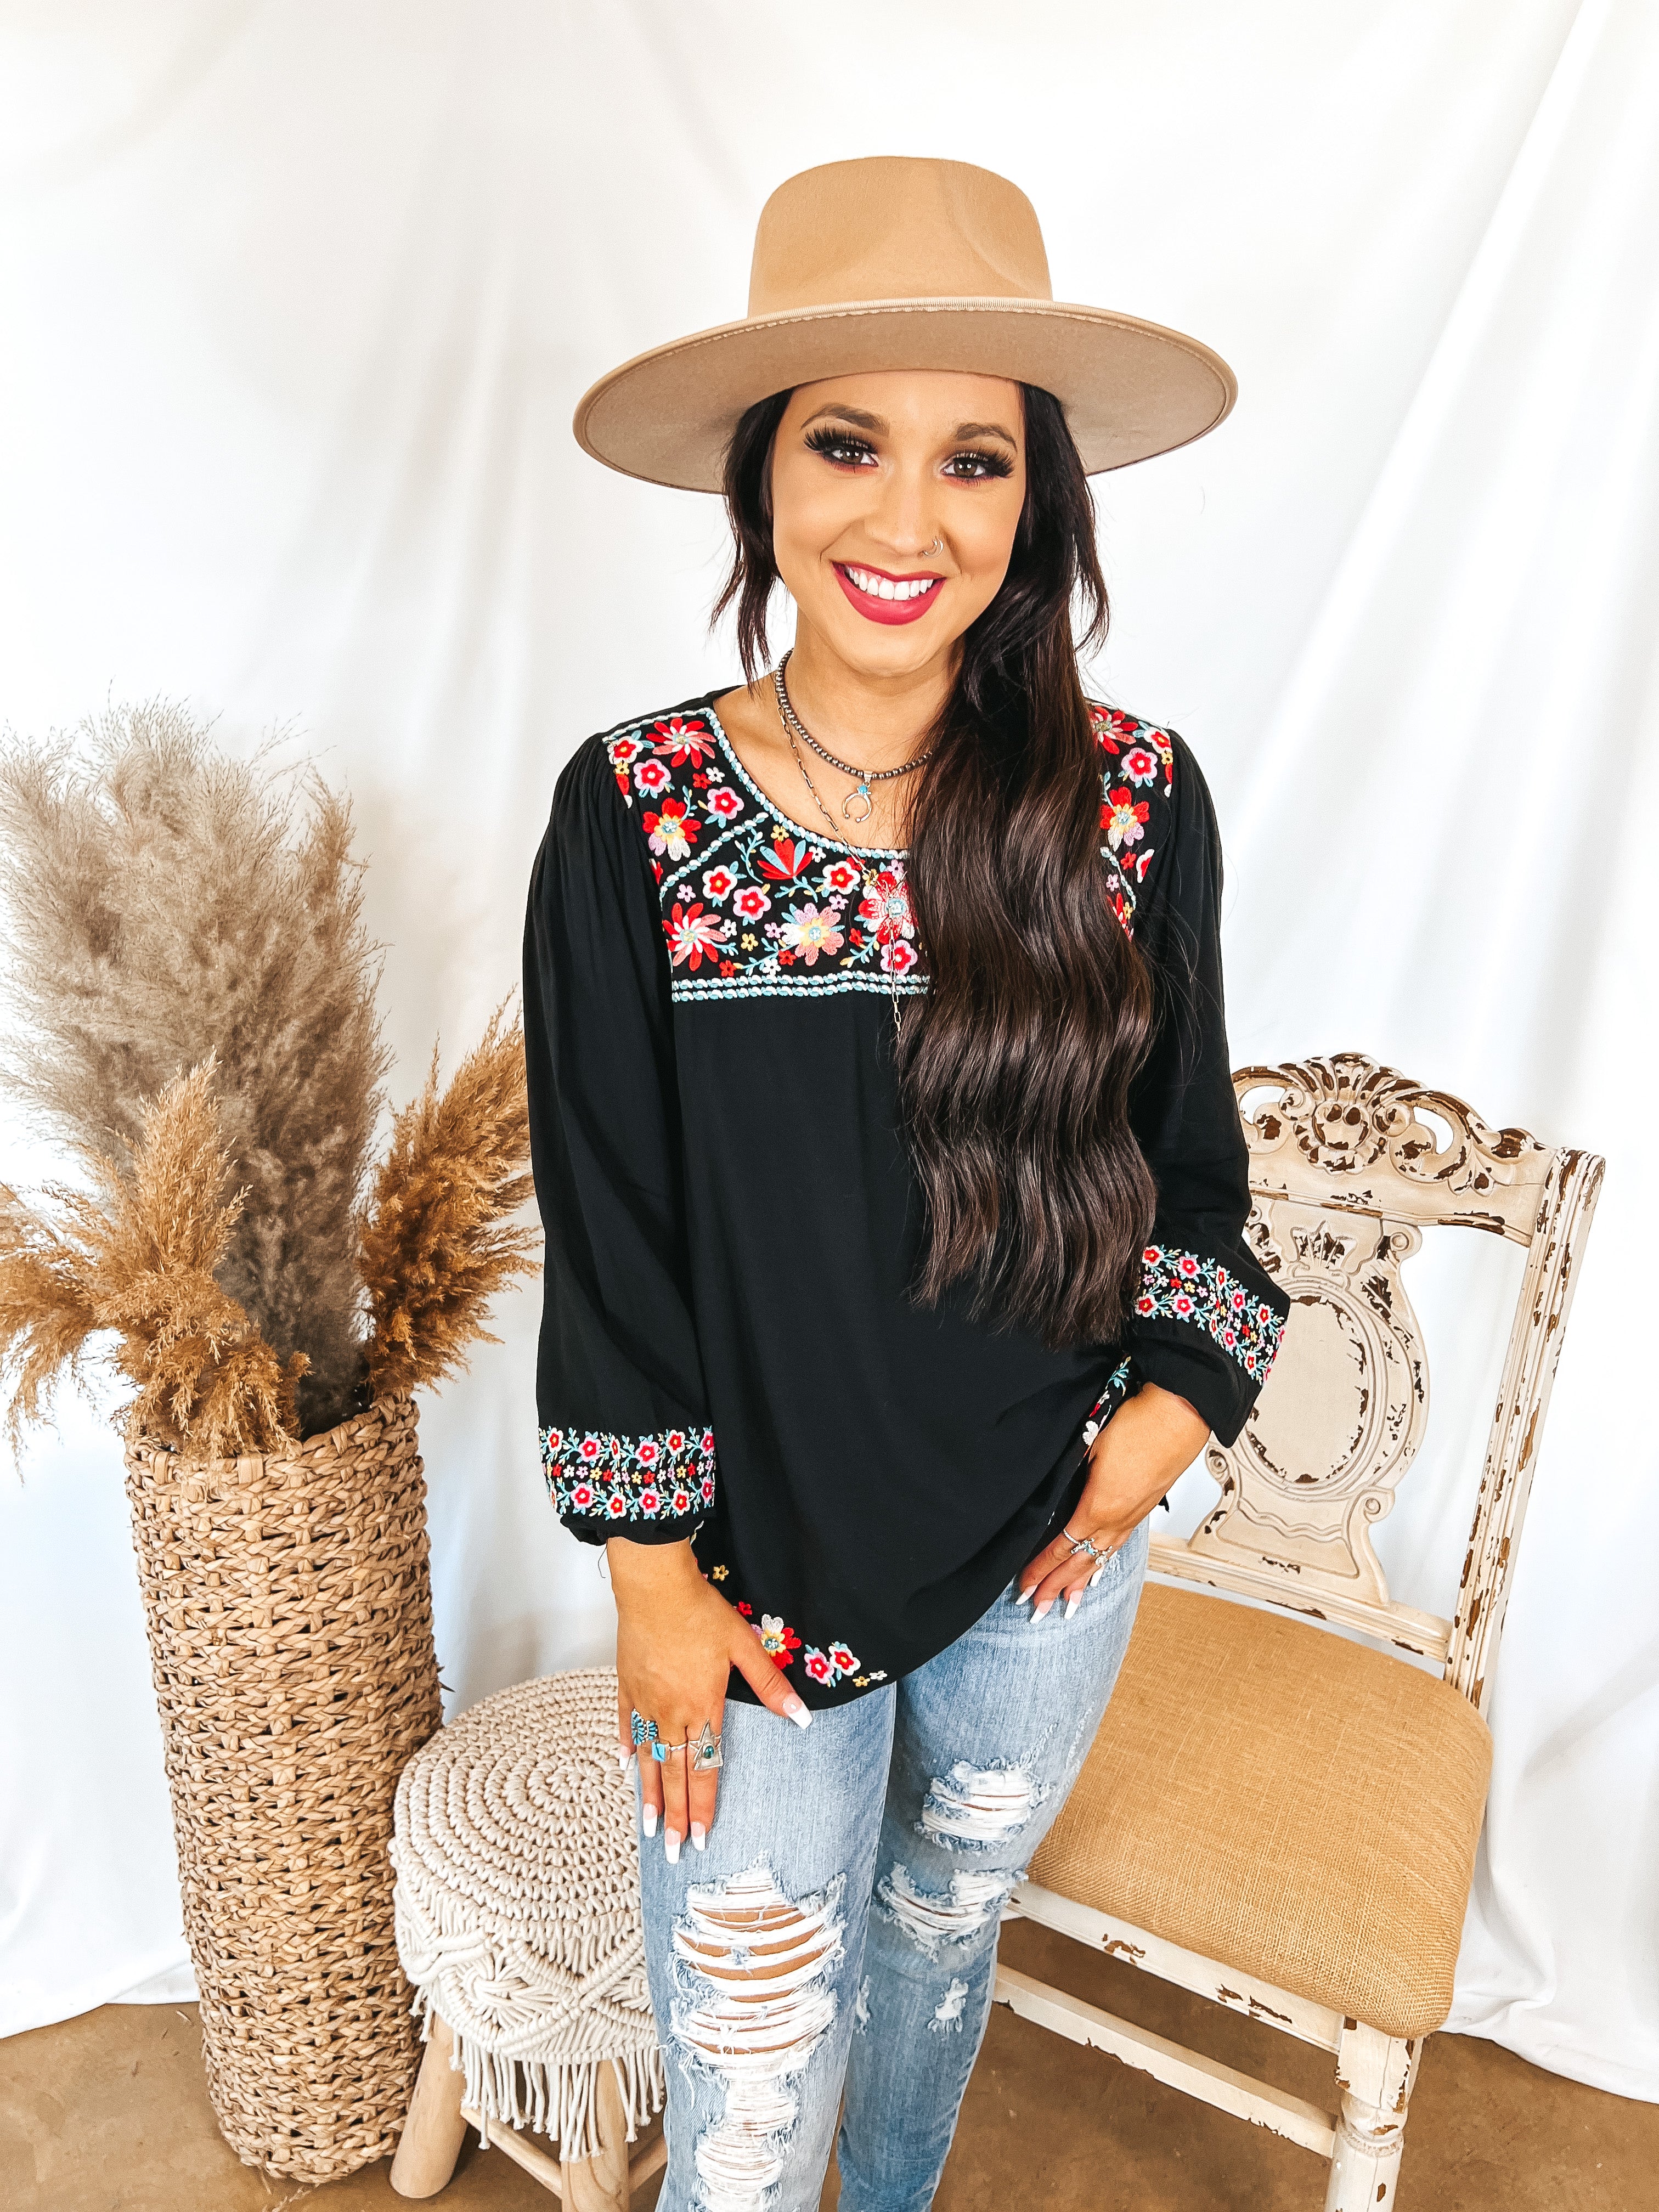 Sunny Sweetheart Floral Embroidered Long Sleeve Top in Black - Giddy Up Glamour Boutique